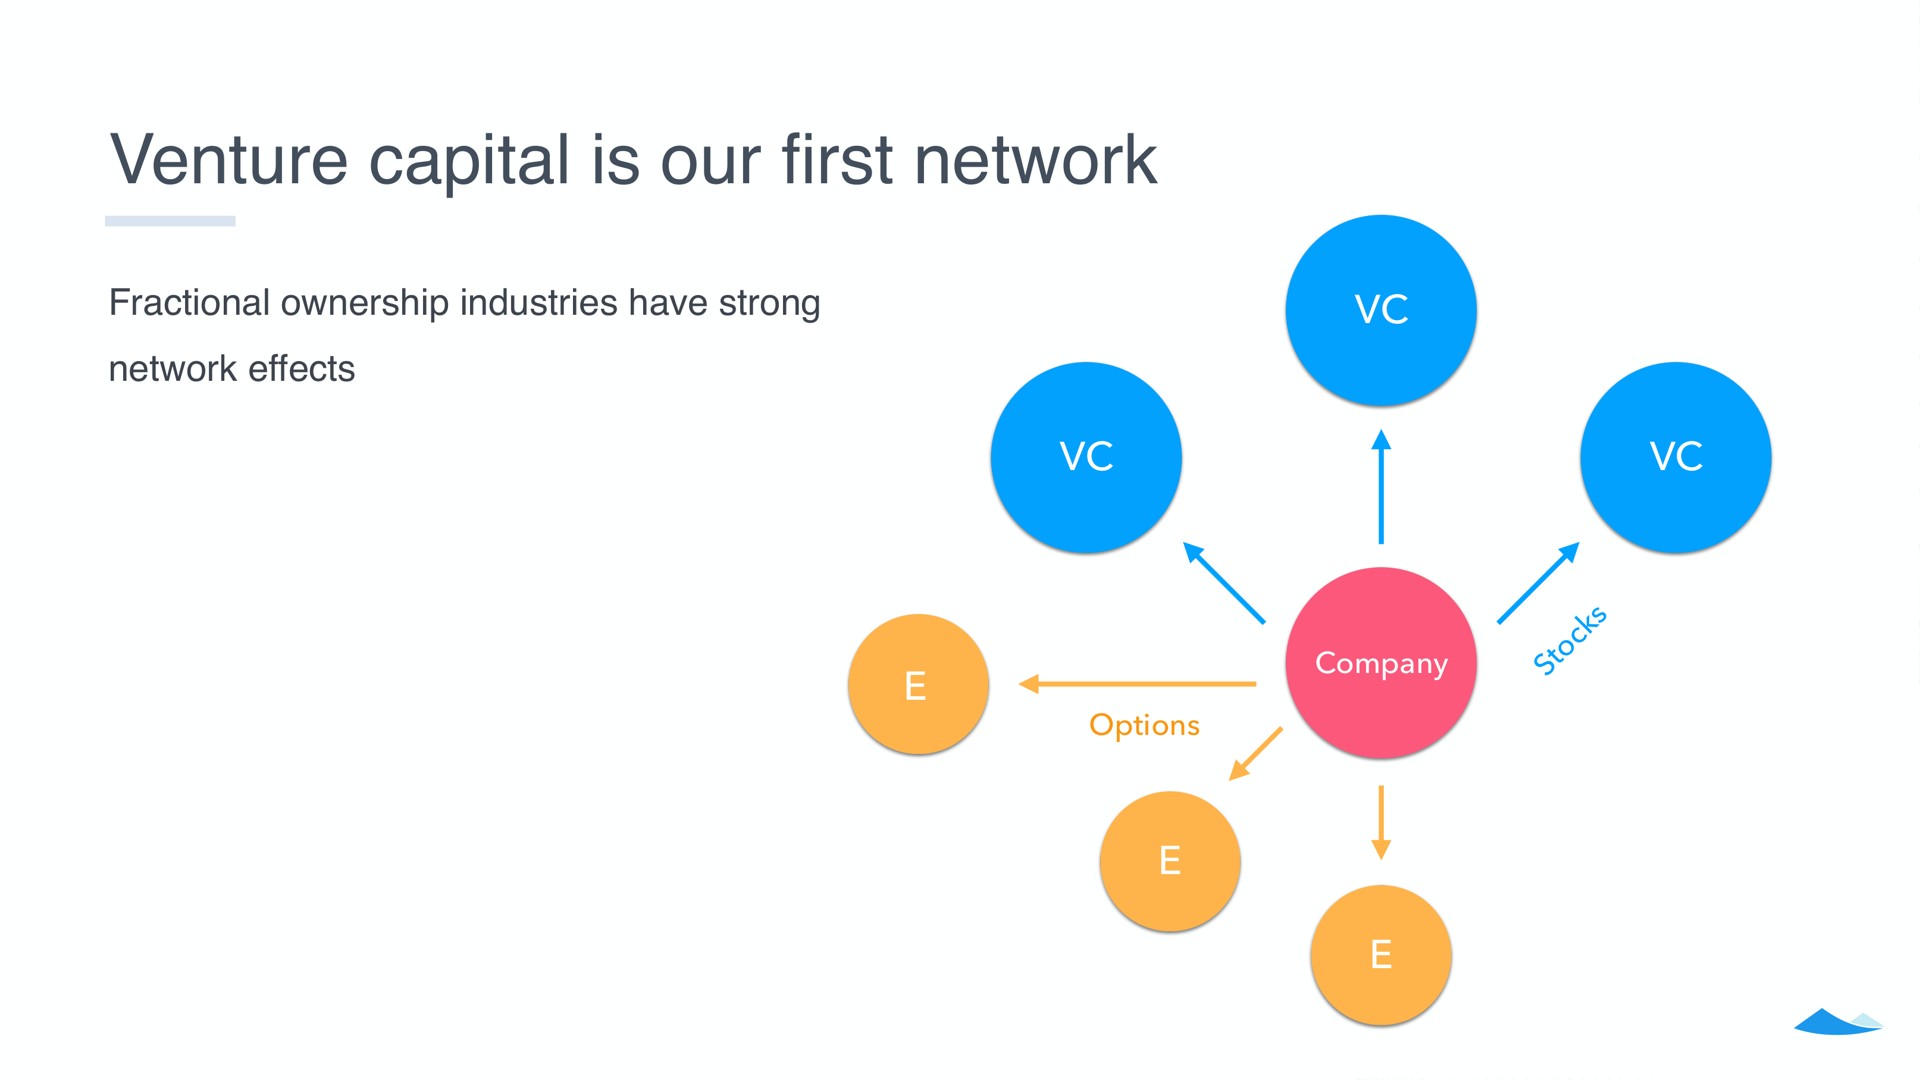 venture capital is our network first fractional ownership industries have strong effects options | Carta